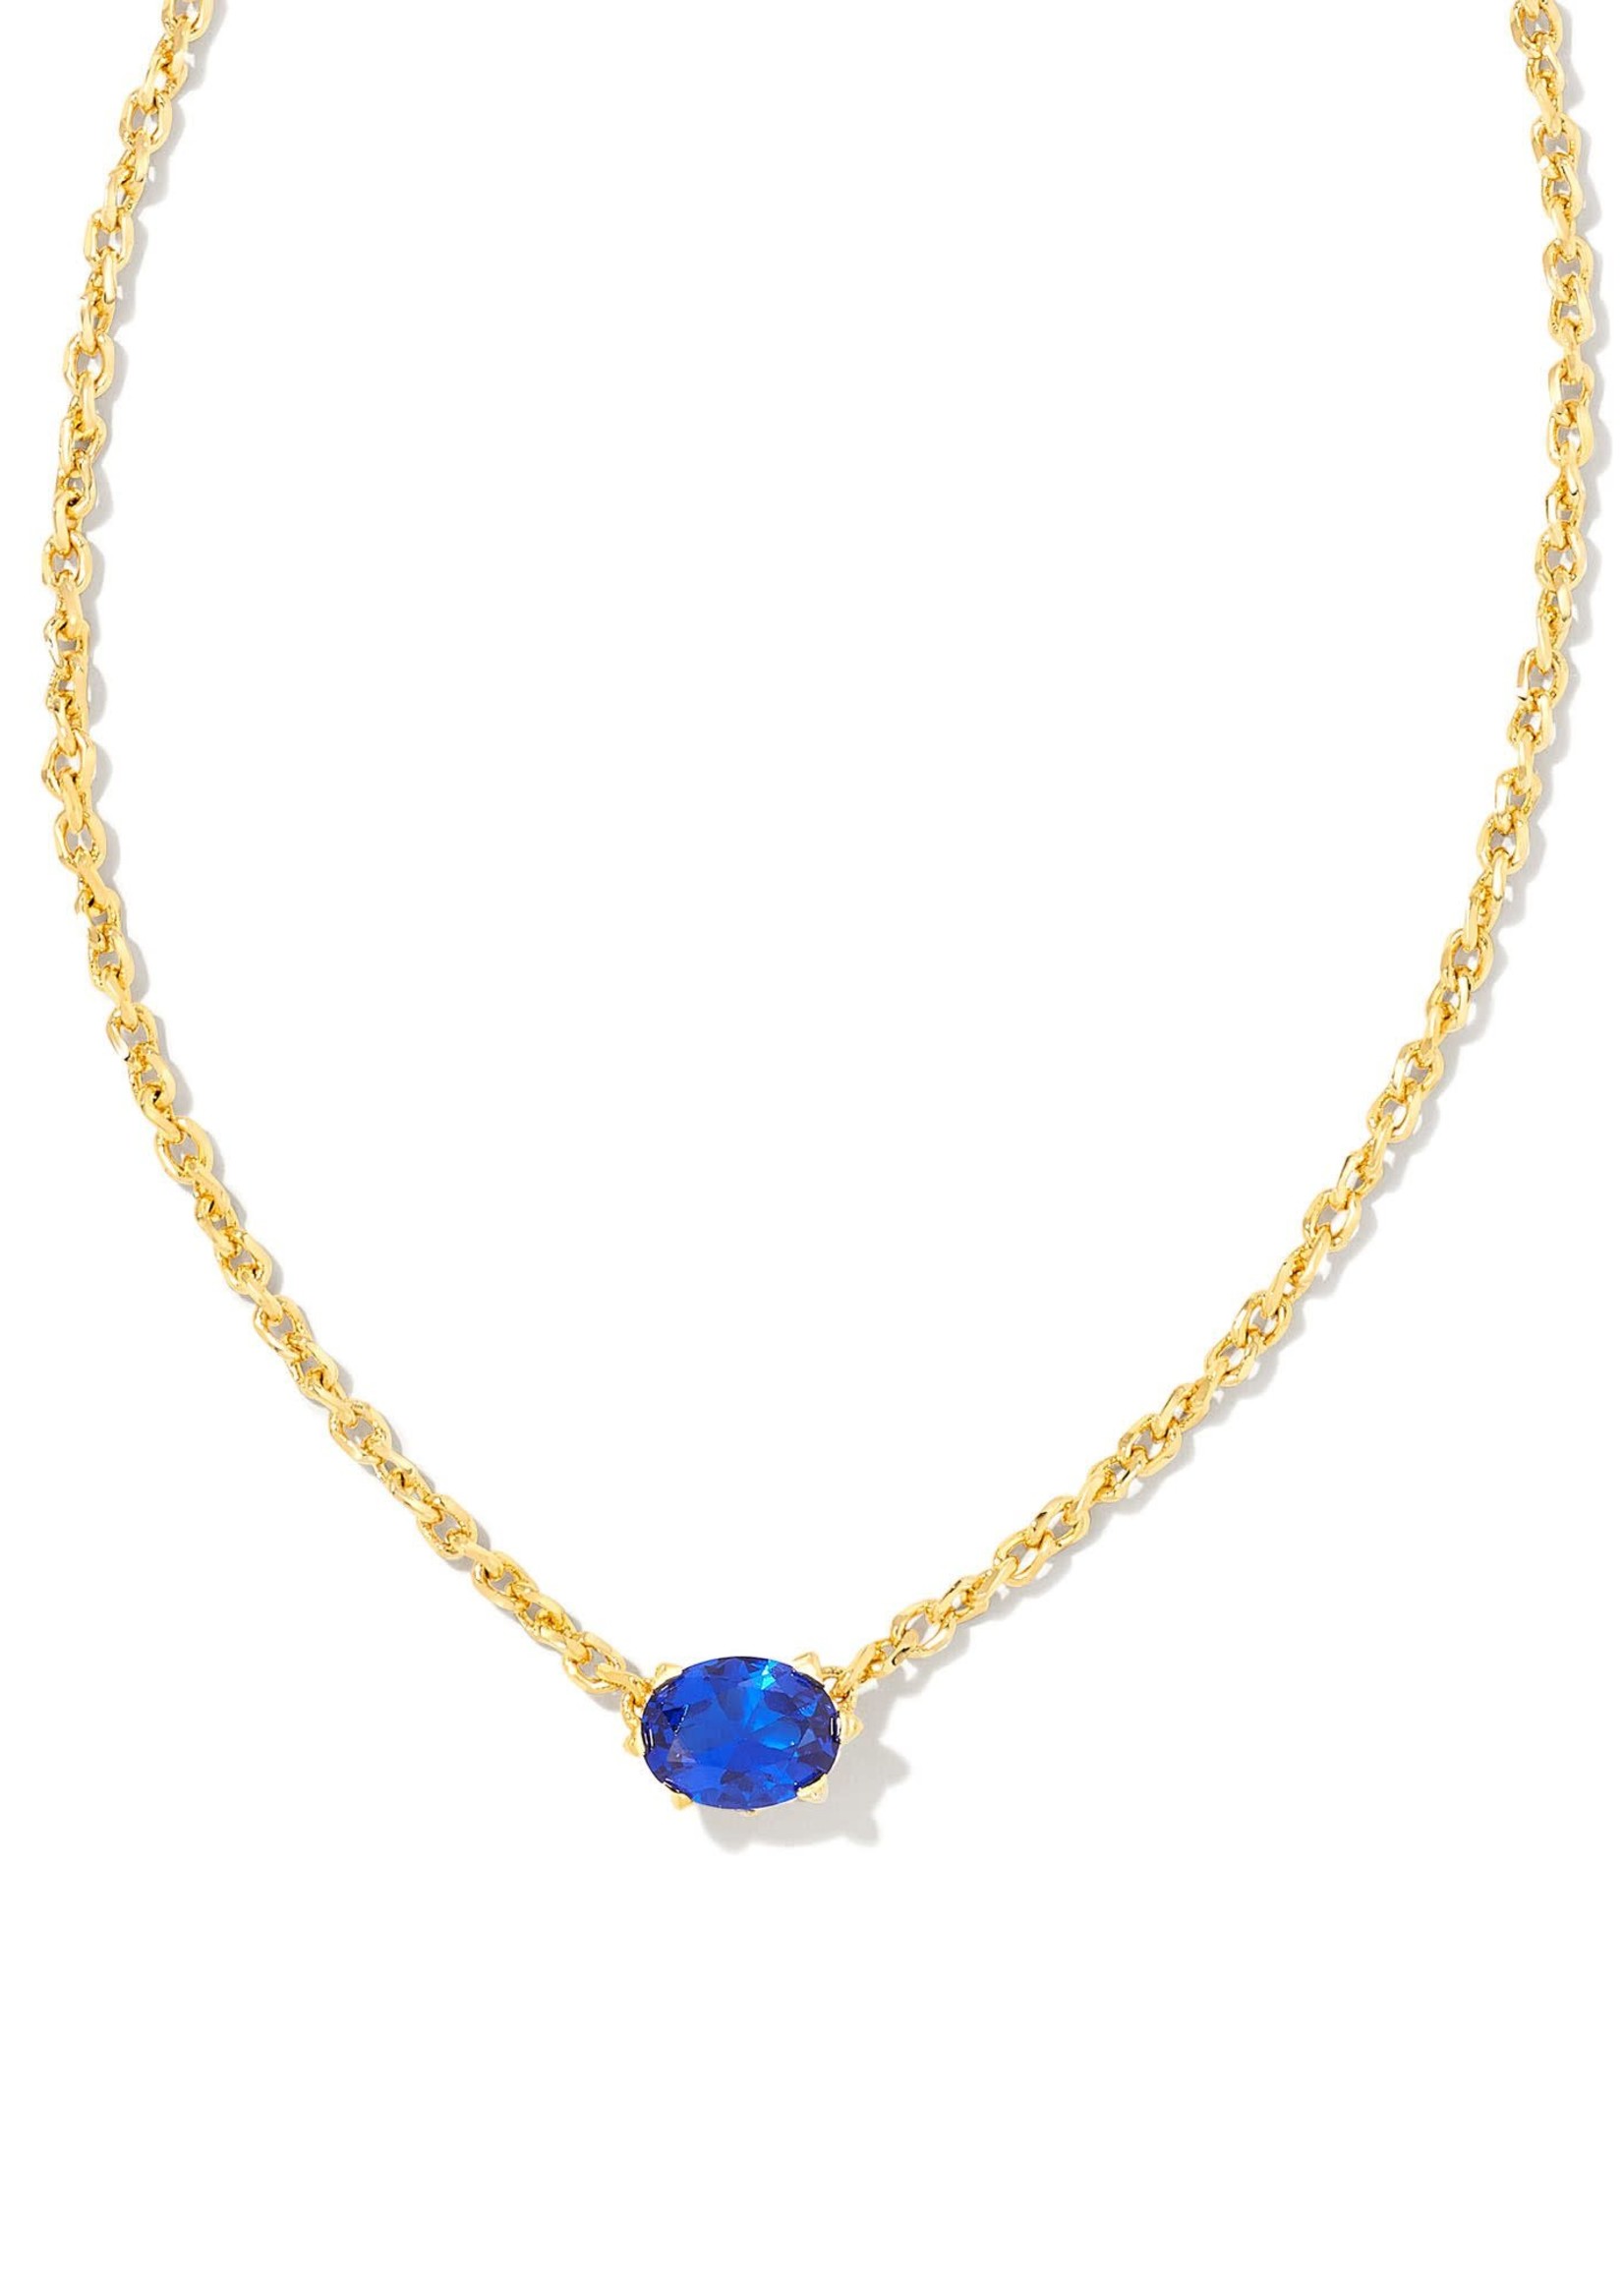 Kendra Scott CAILIN CRYSTAL PENDANT NECKLACE GOLD BLUE CRYSTAL